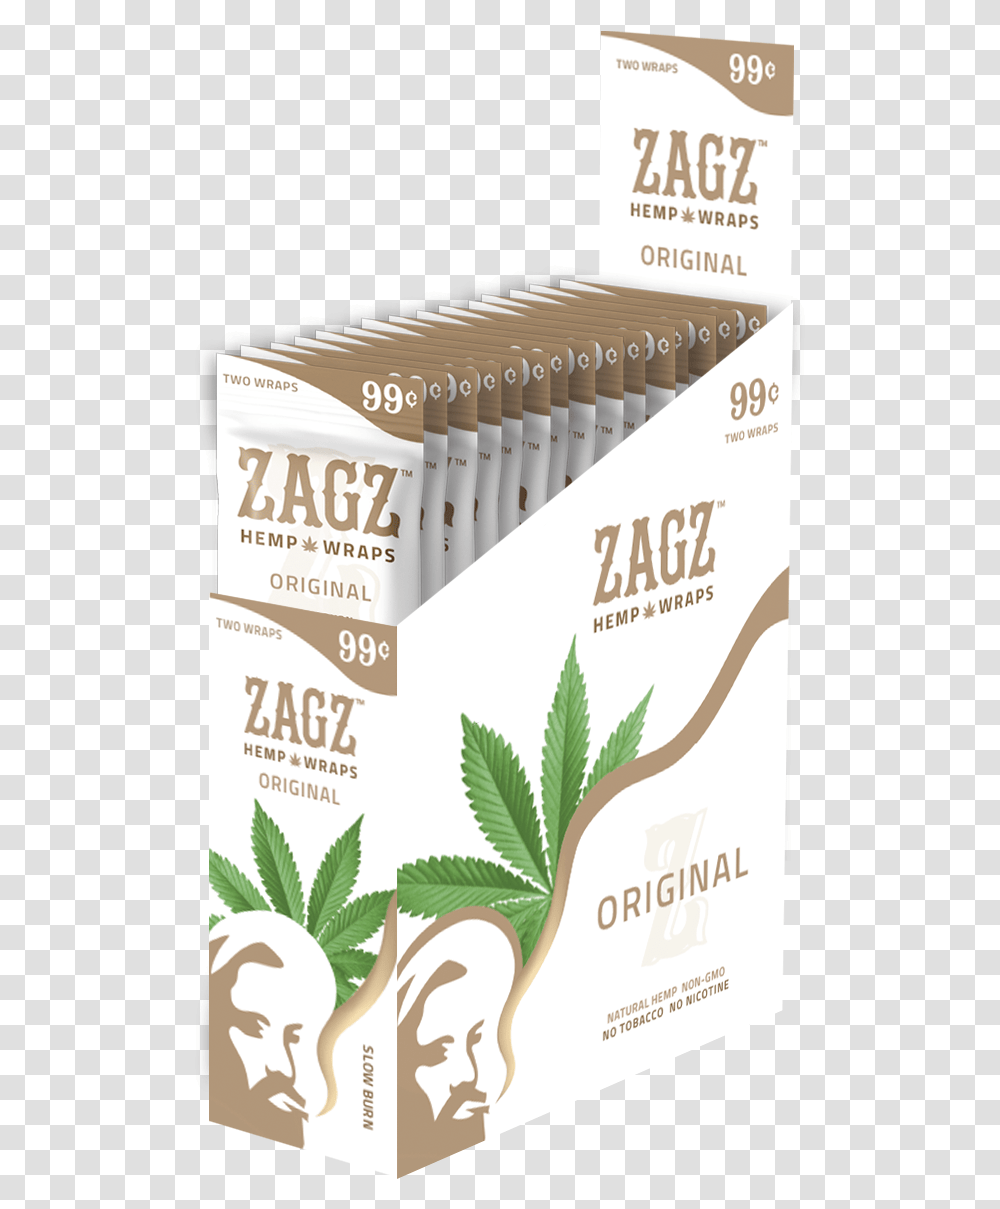 How To Roll A Zig Zag Blunt I Growing Marijuana Blog Blunt, Plant, Herbal, Herbs, Planter Transparent Png